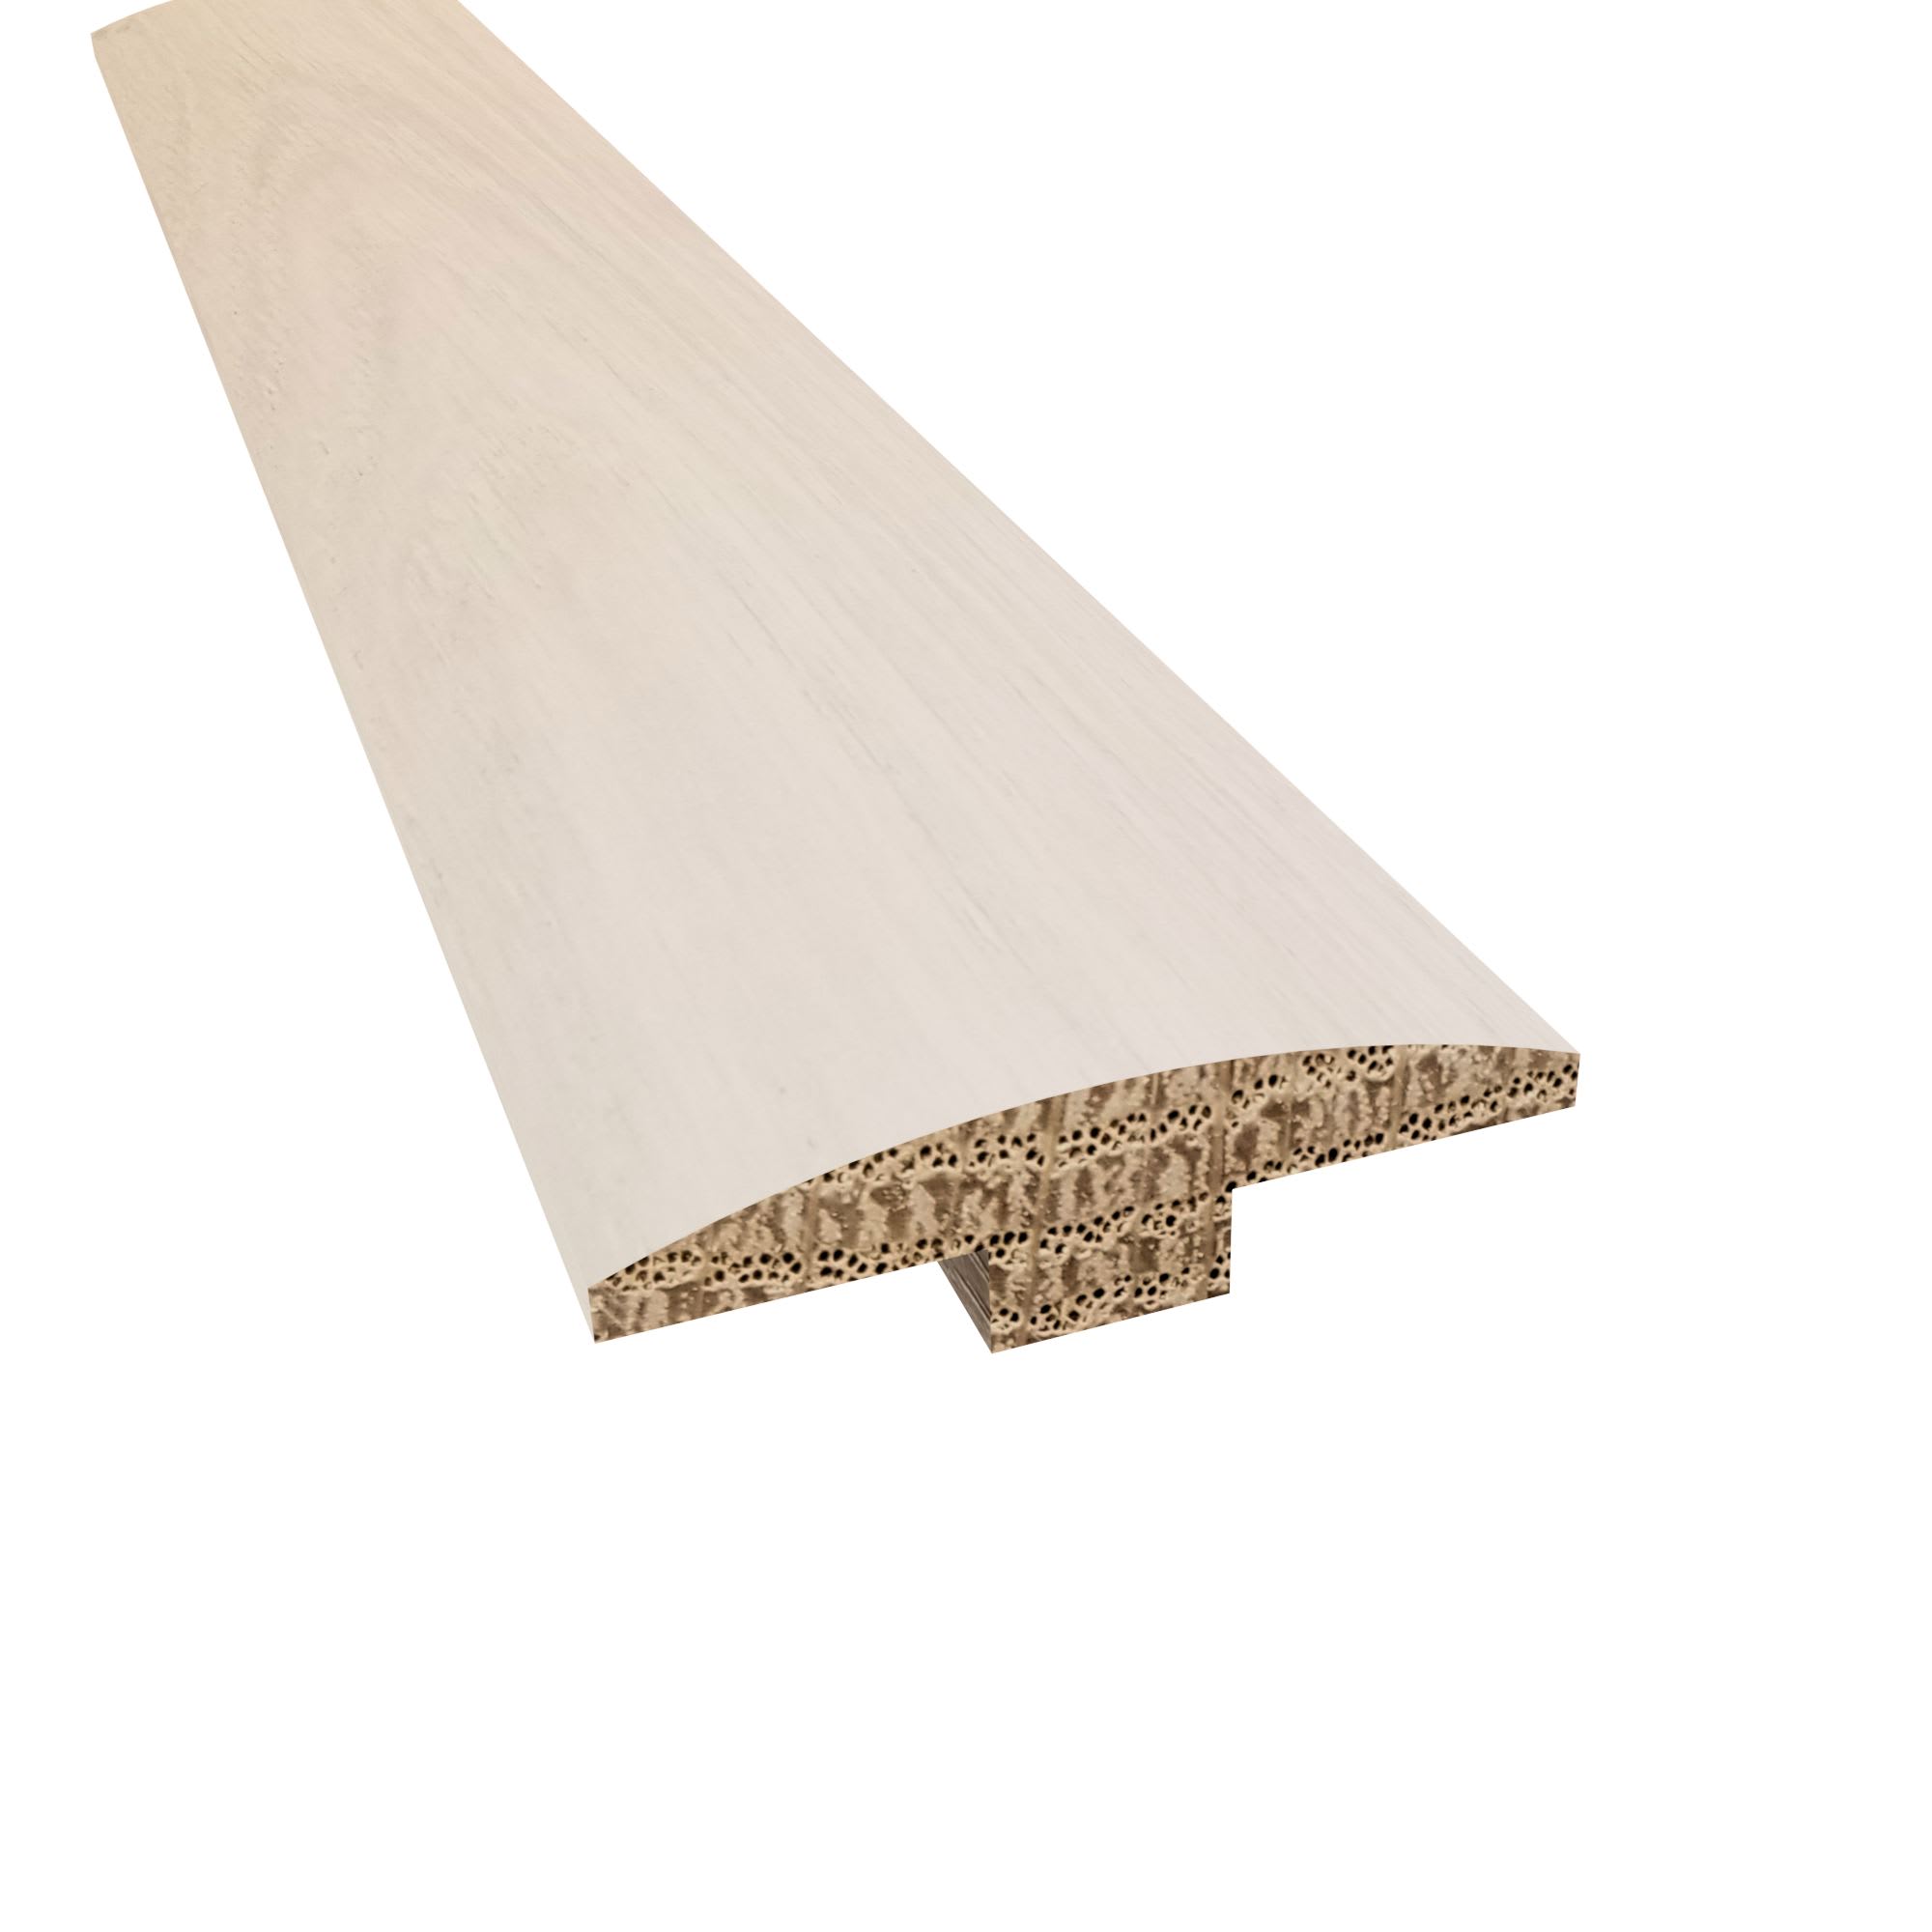 Prefinished Platinum Coast Oak 1/4 in. Thick x 2 in. Wide x 78 in. Length T-Molding